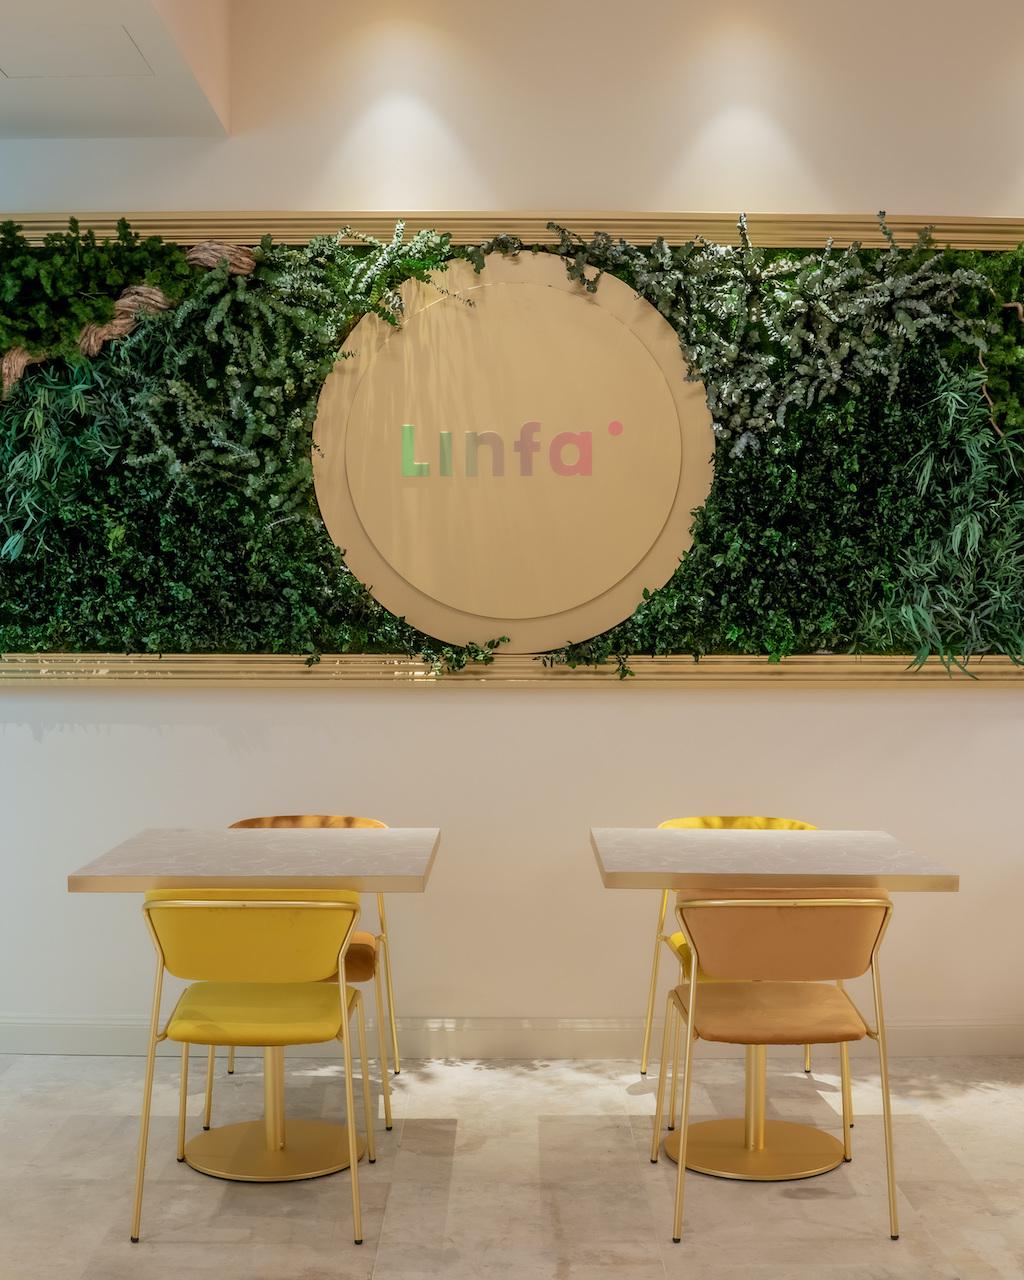 Linfa Milano – Eat Different brings old-world charm to Milan